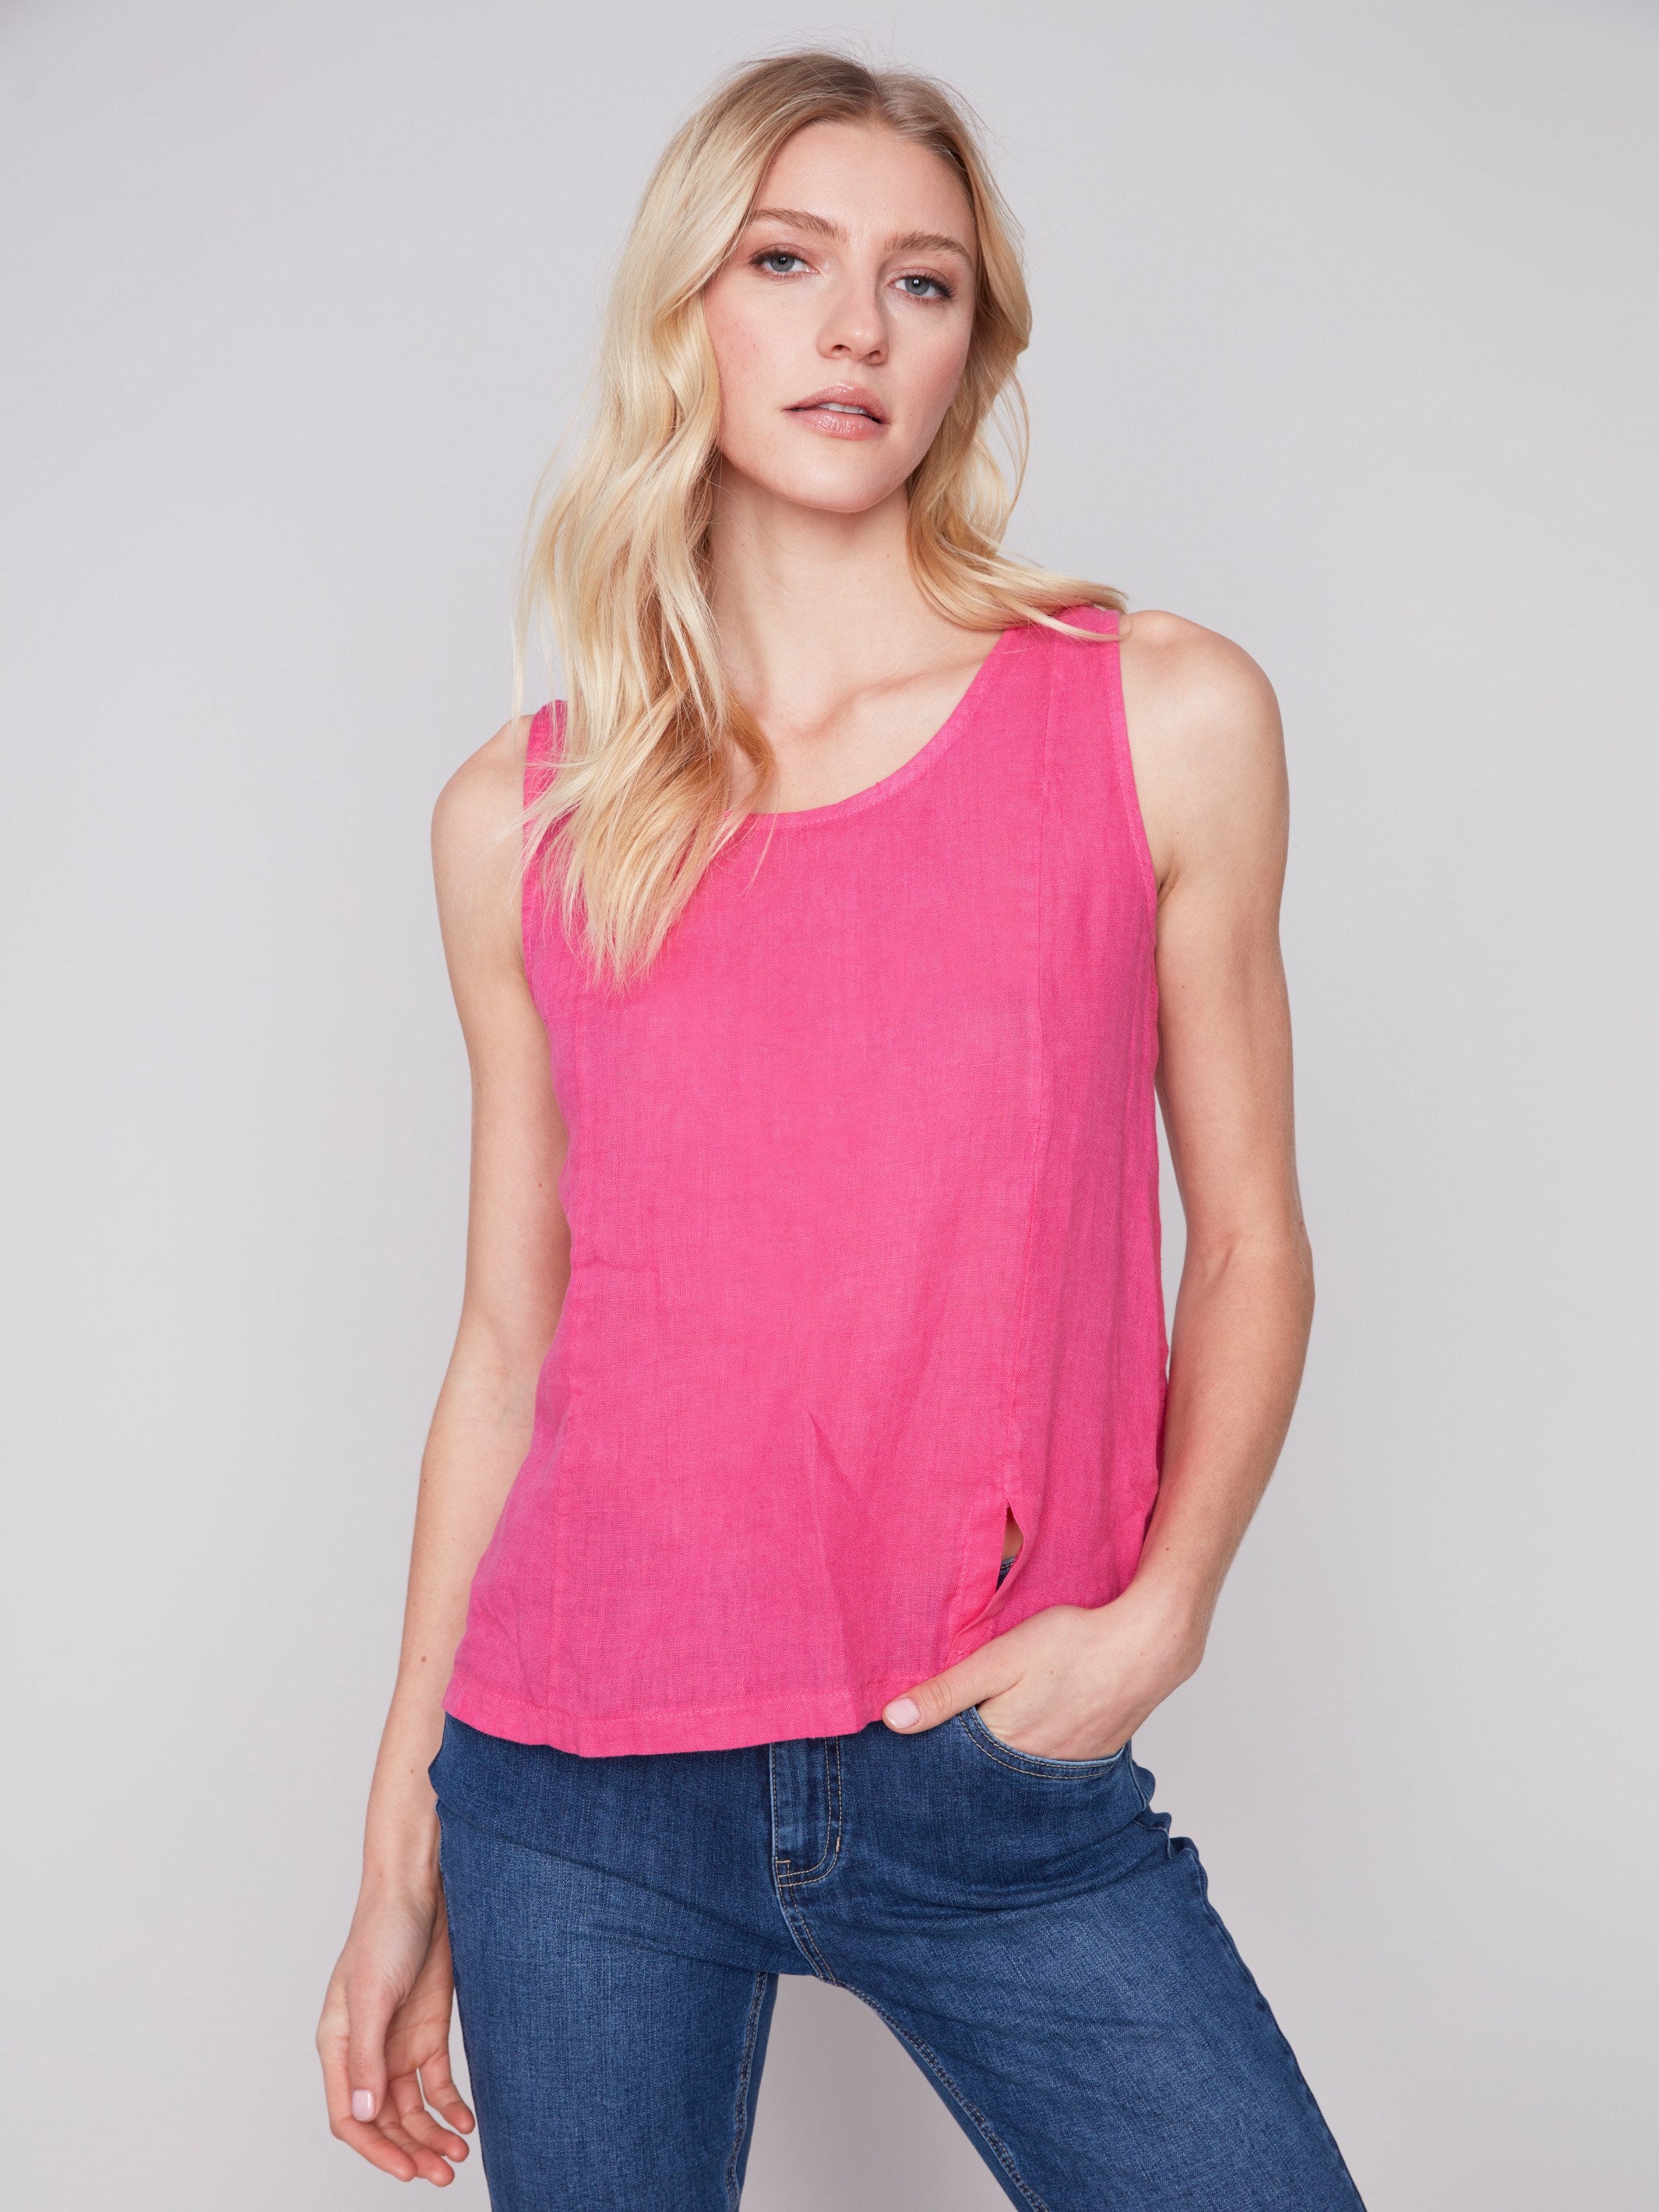 Charlie B Sleeveless Linen Top with Slit - Punch - Image 4